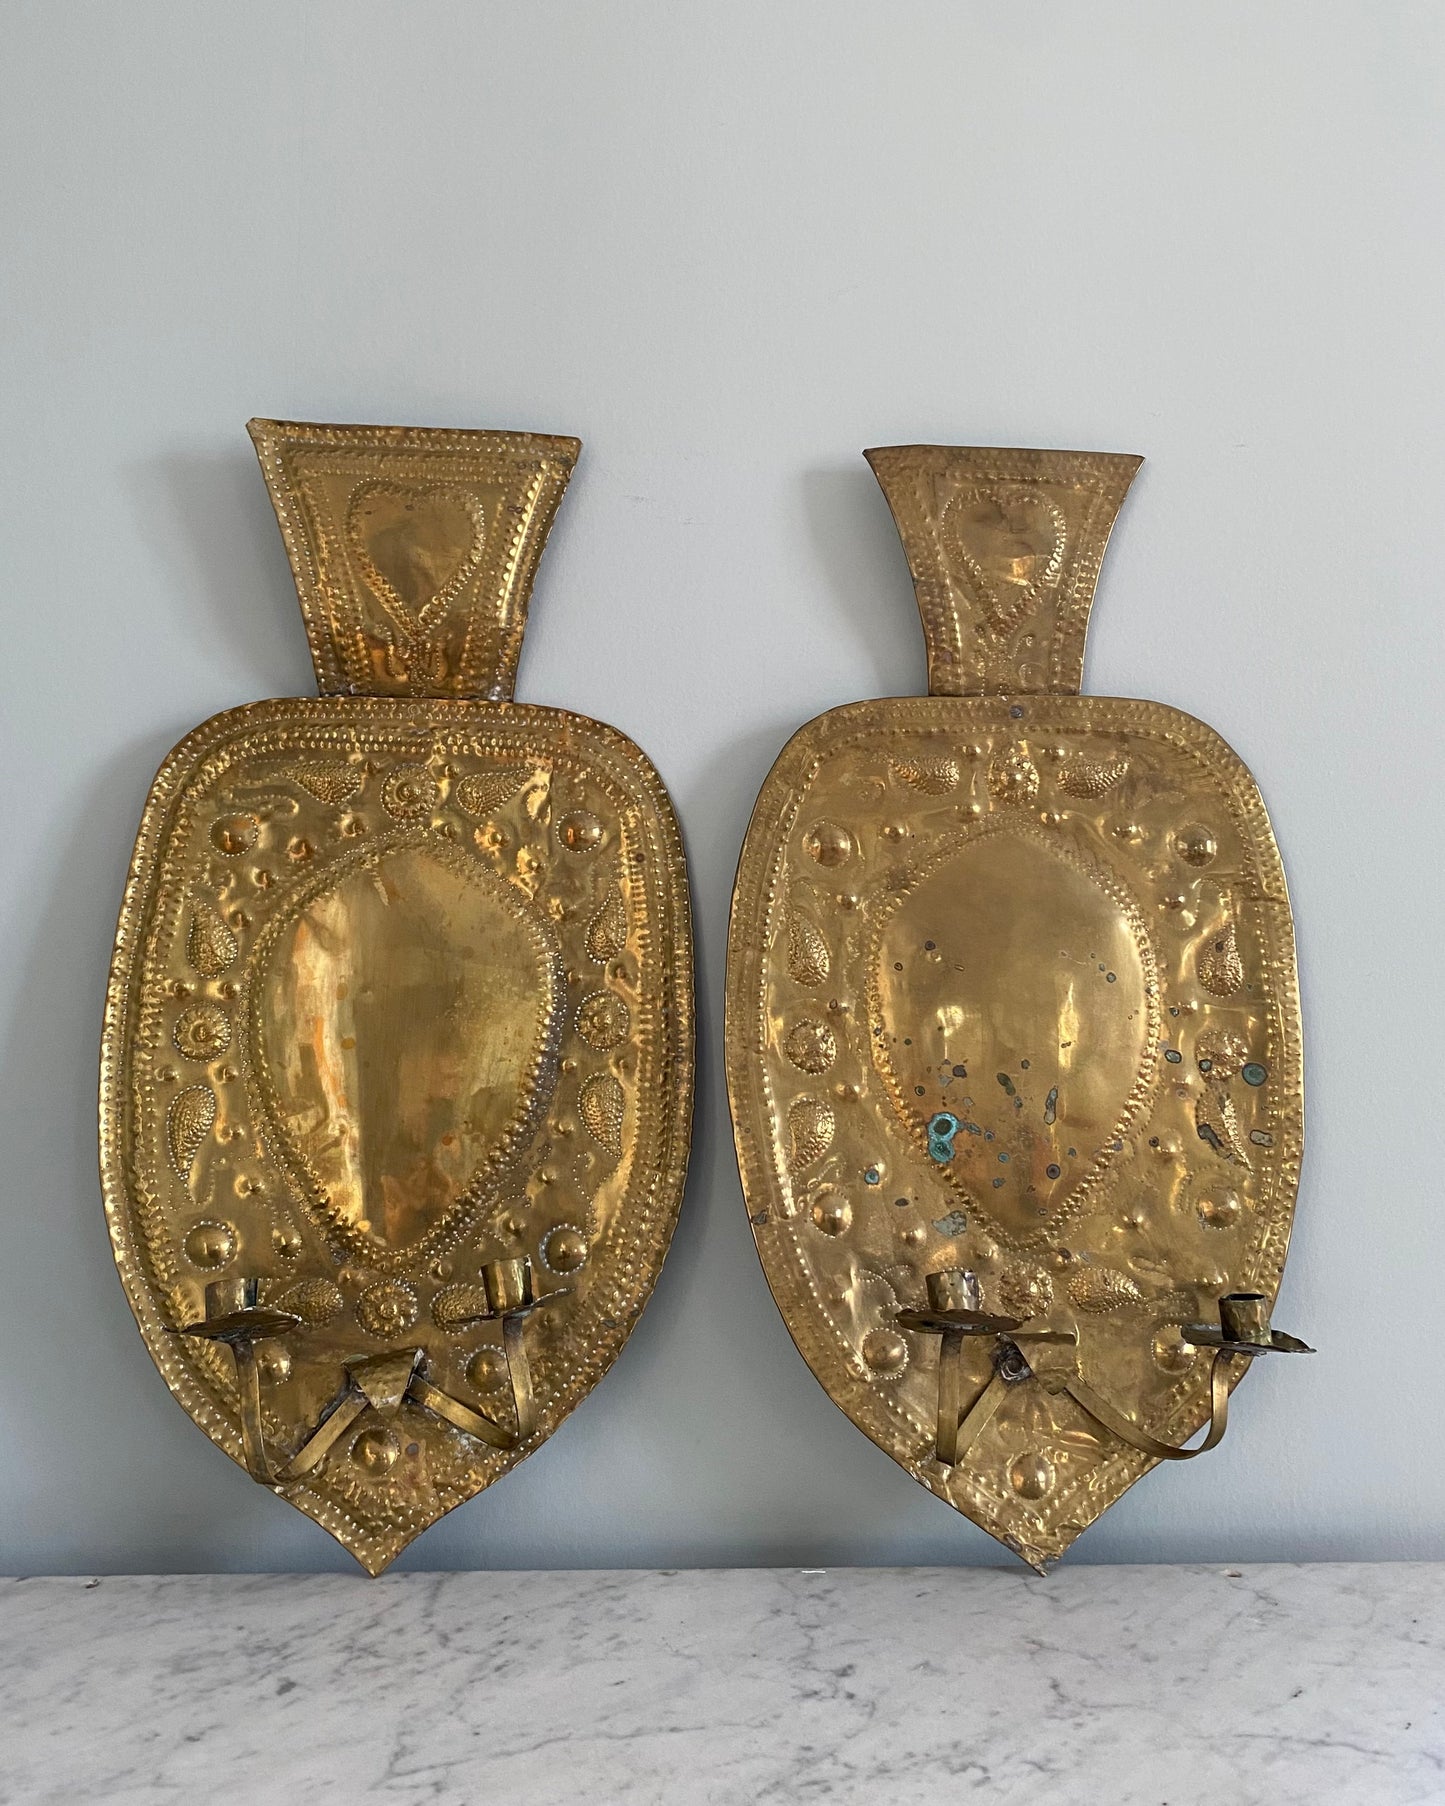 Pair of 19th century double armed brass wall sconces